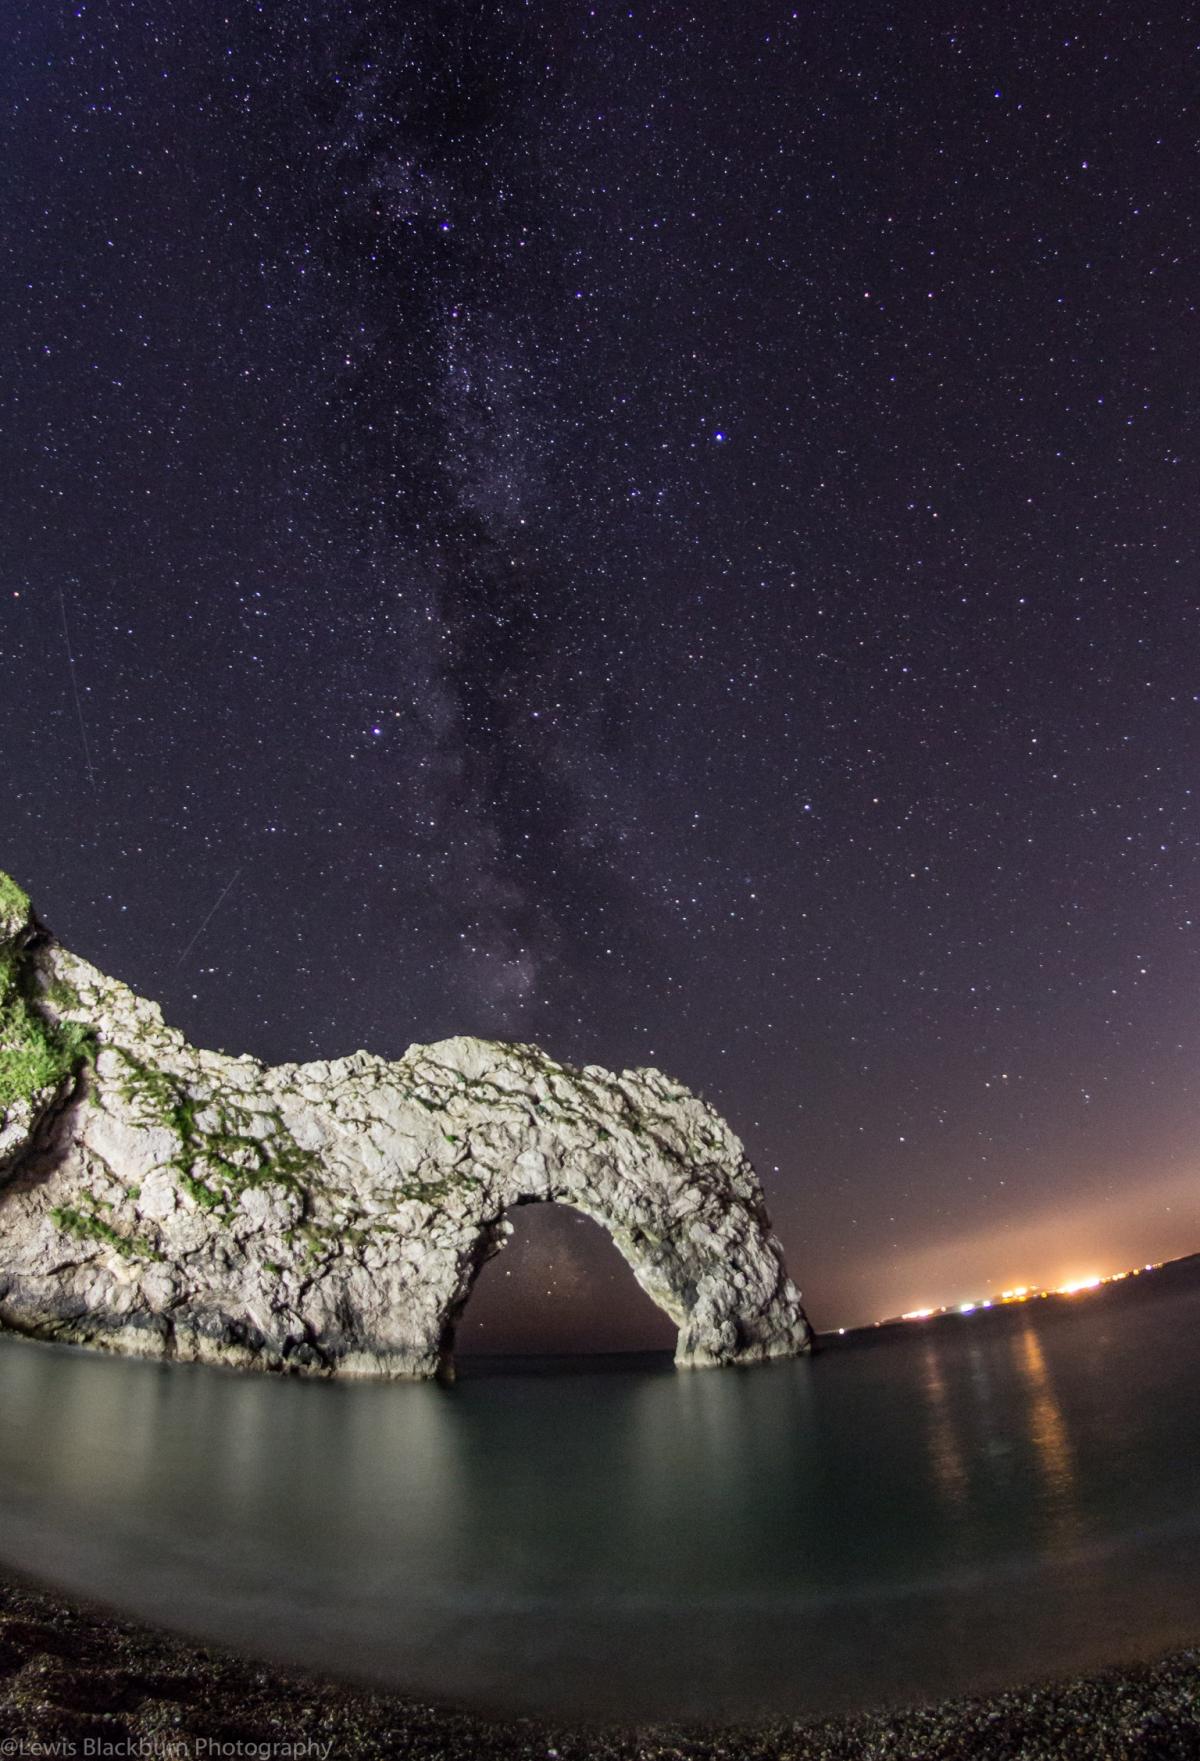 Durdle Door was illuminated for one night only as part of the Night of Heritage Light event. By Lewis Blackburn